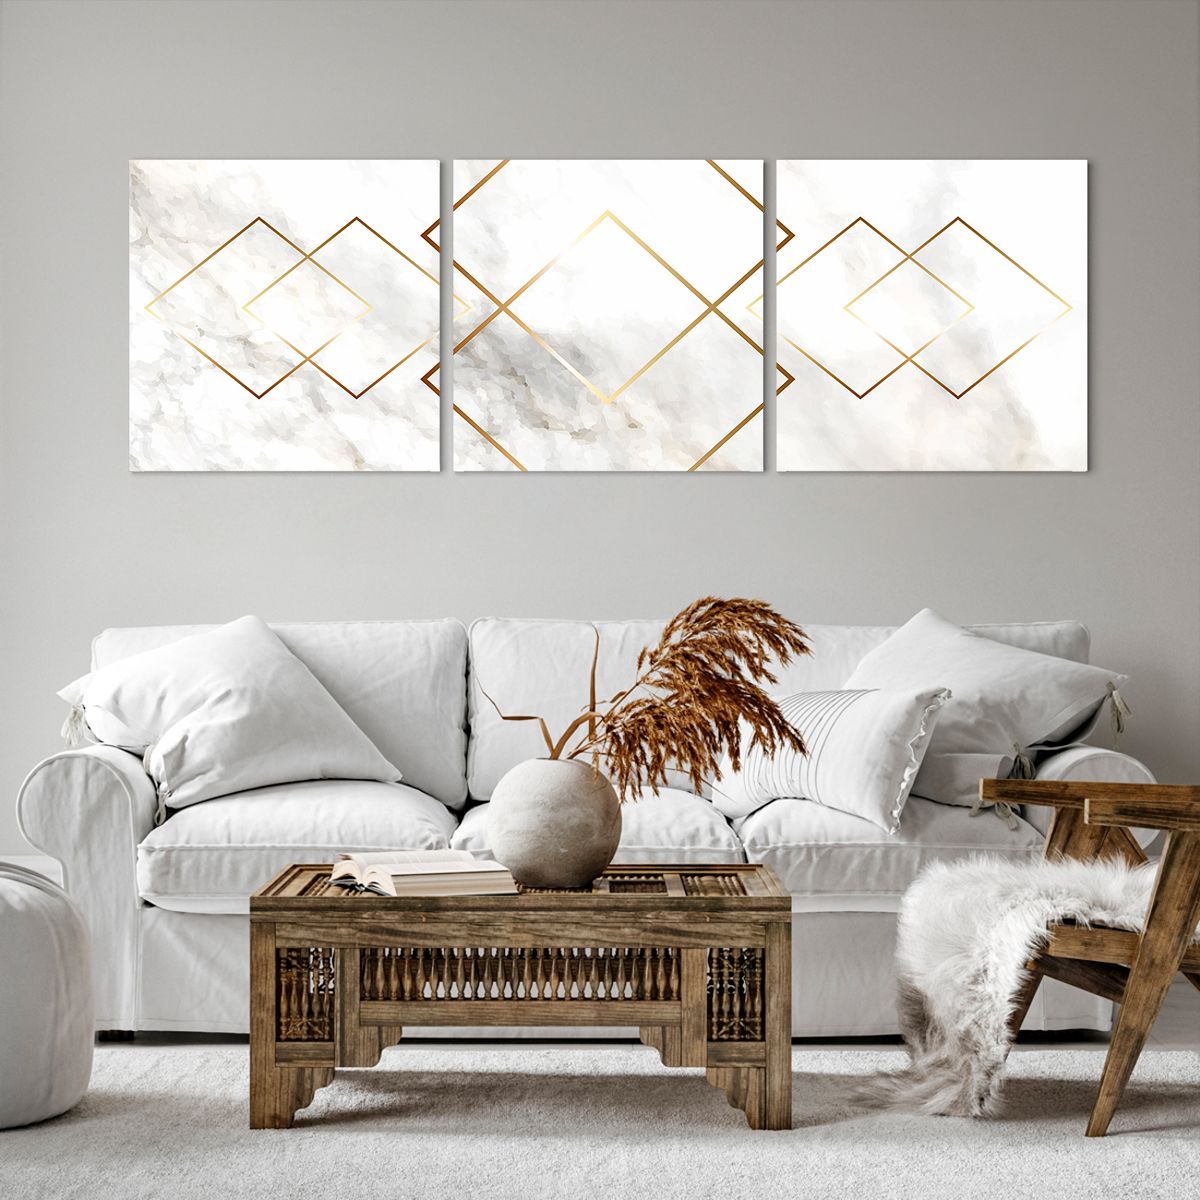 Impression sur toile Abstraction, Impression sur toile Art, Impression sur toile Marbre, Impression sur toile Diamant, Impression sur toile Art Moderne